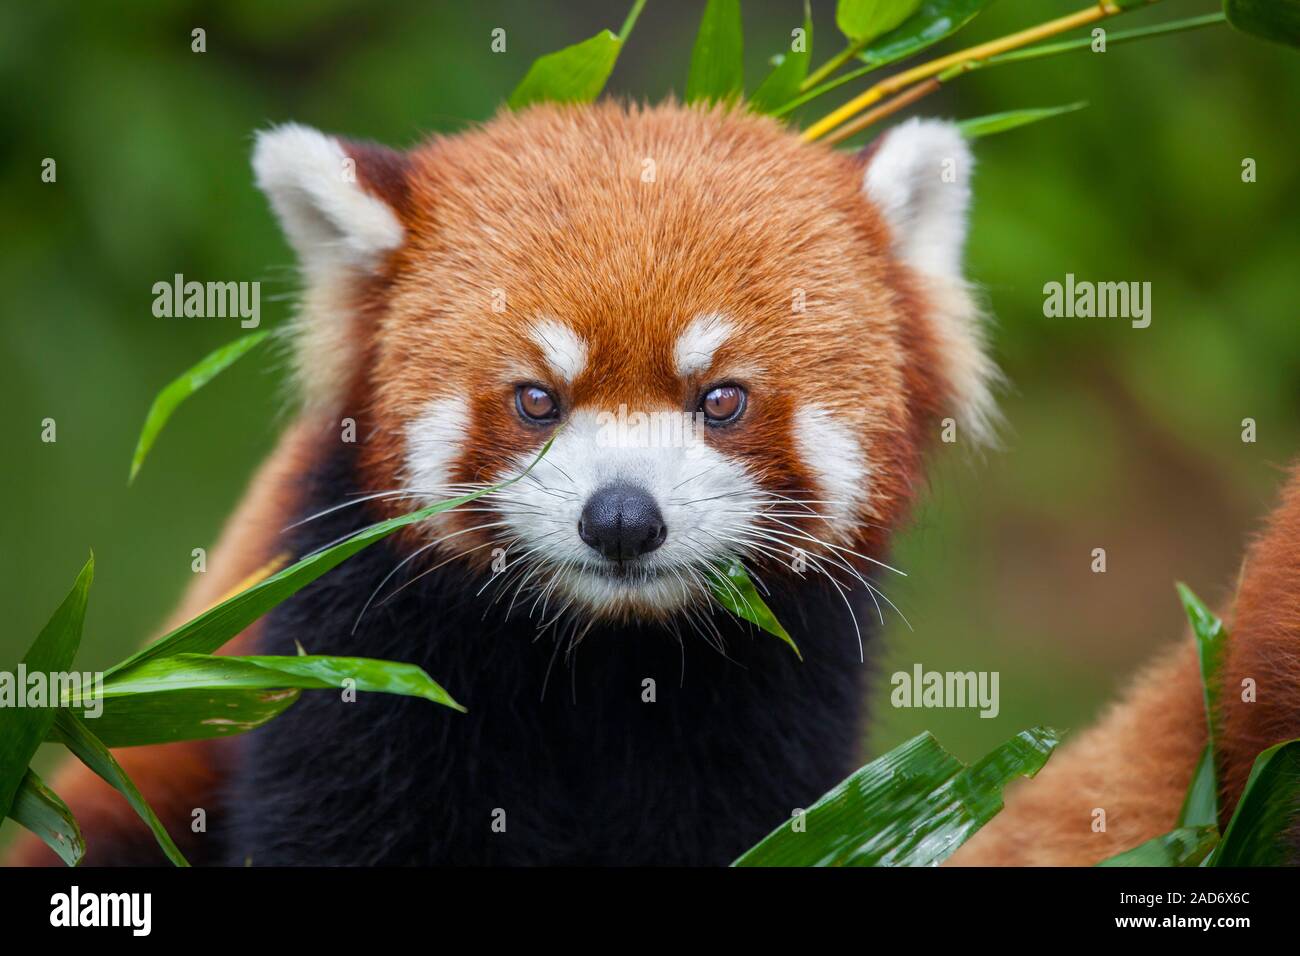 The Red Panda, Ailurus fulgens, or 'shining cat', is a small arboreal mammal and the only species of the genus Ailurus. China. Stock Photo